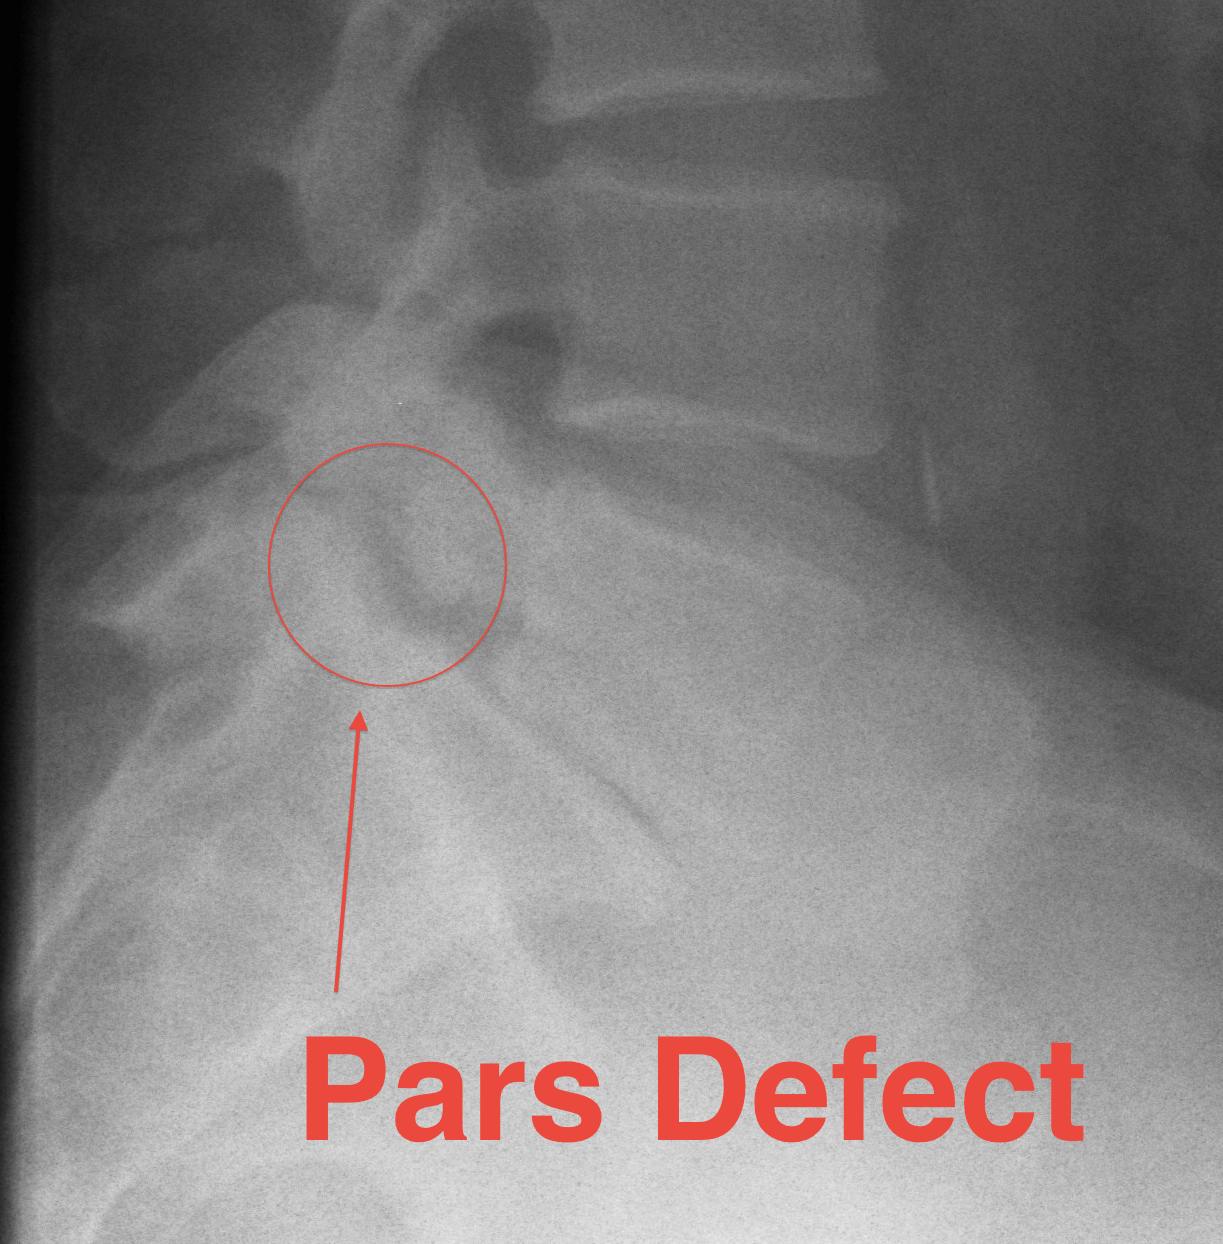 Pars Defect Lateral Xray